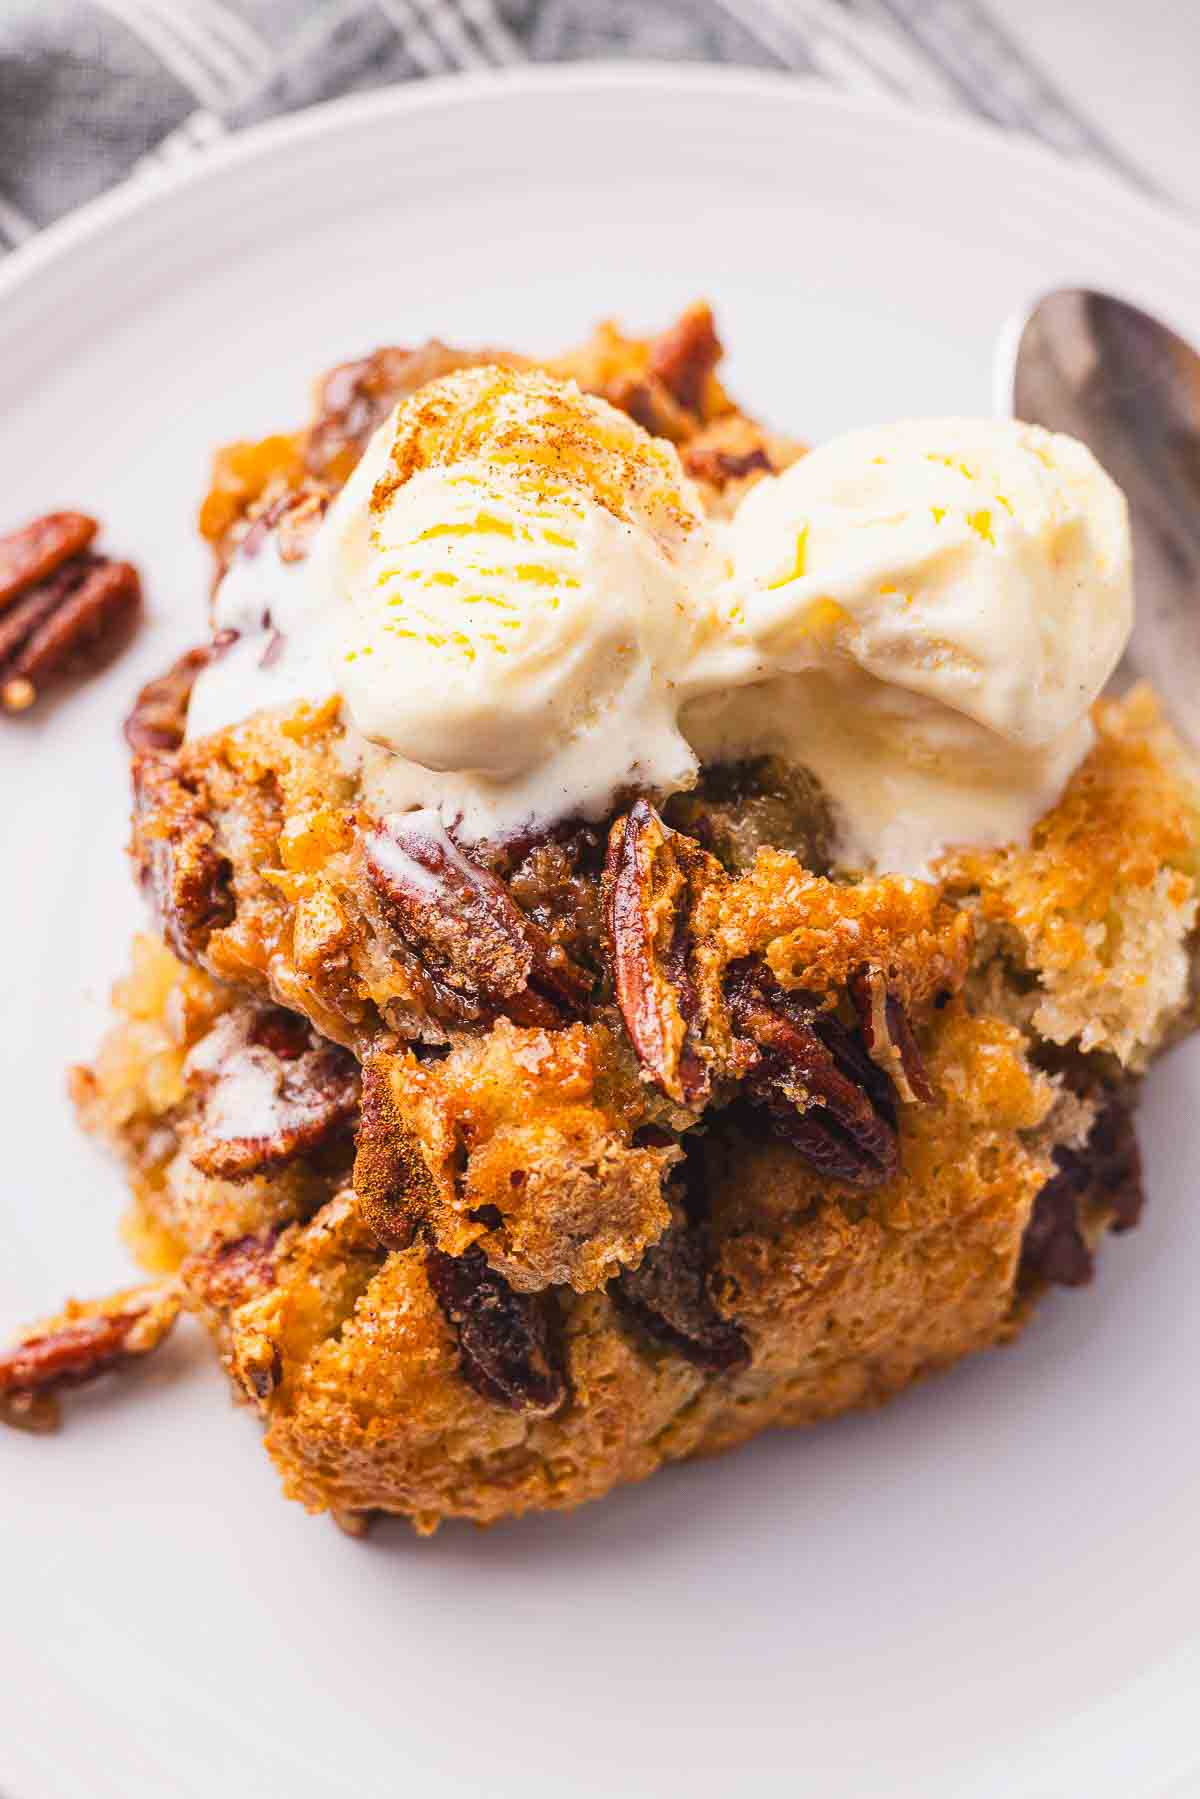 Pecan bread cobbler with ice cream and pecans on a plate.